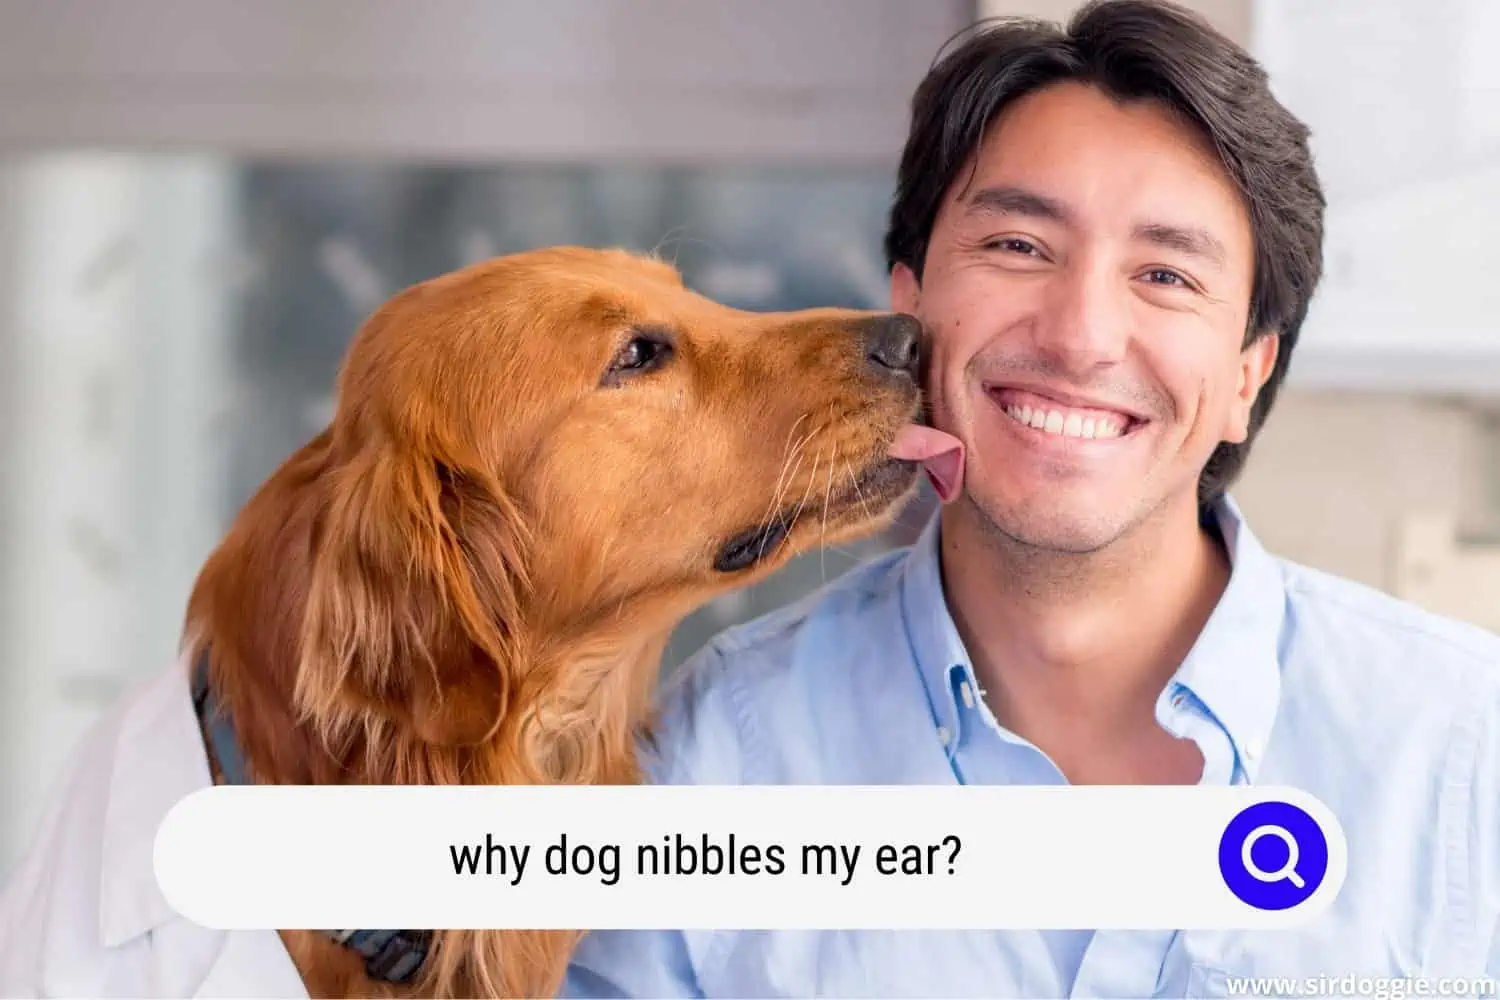 dog nibbles owner's ear